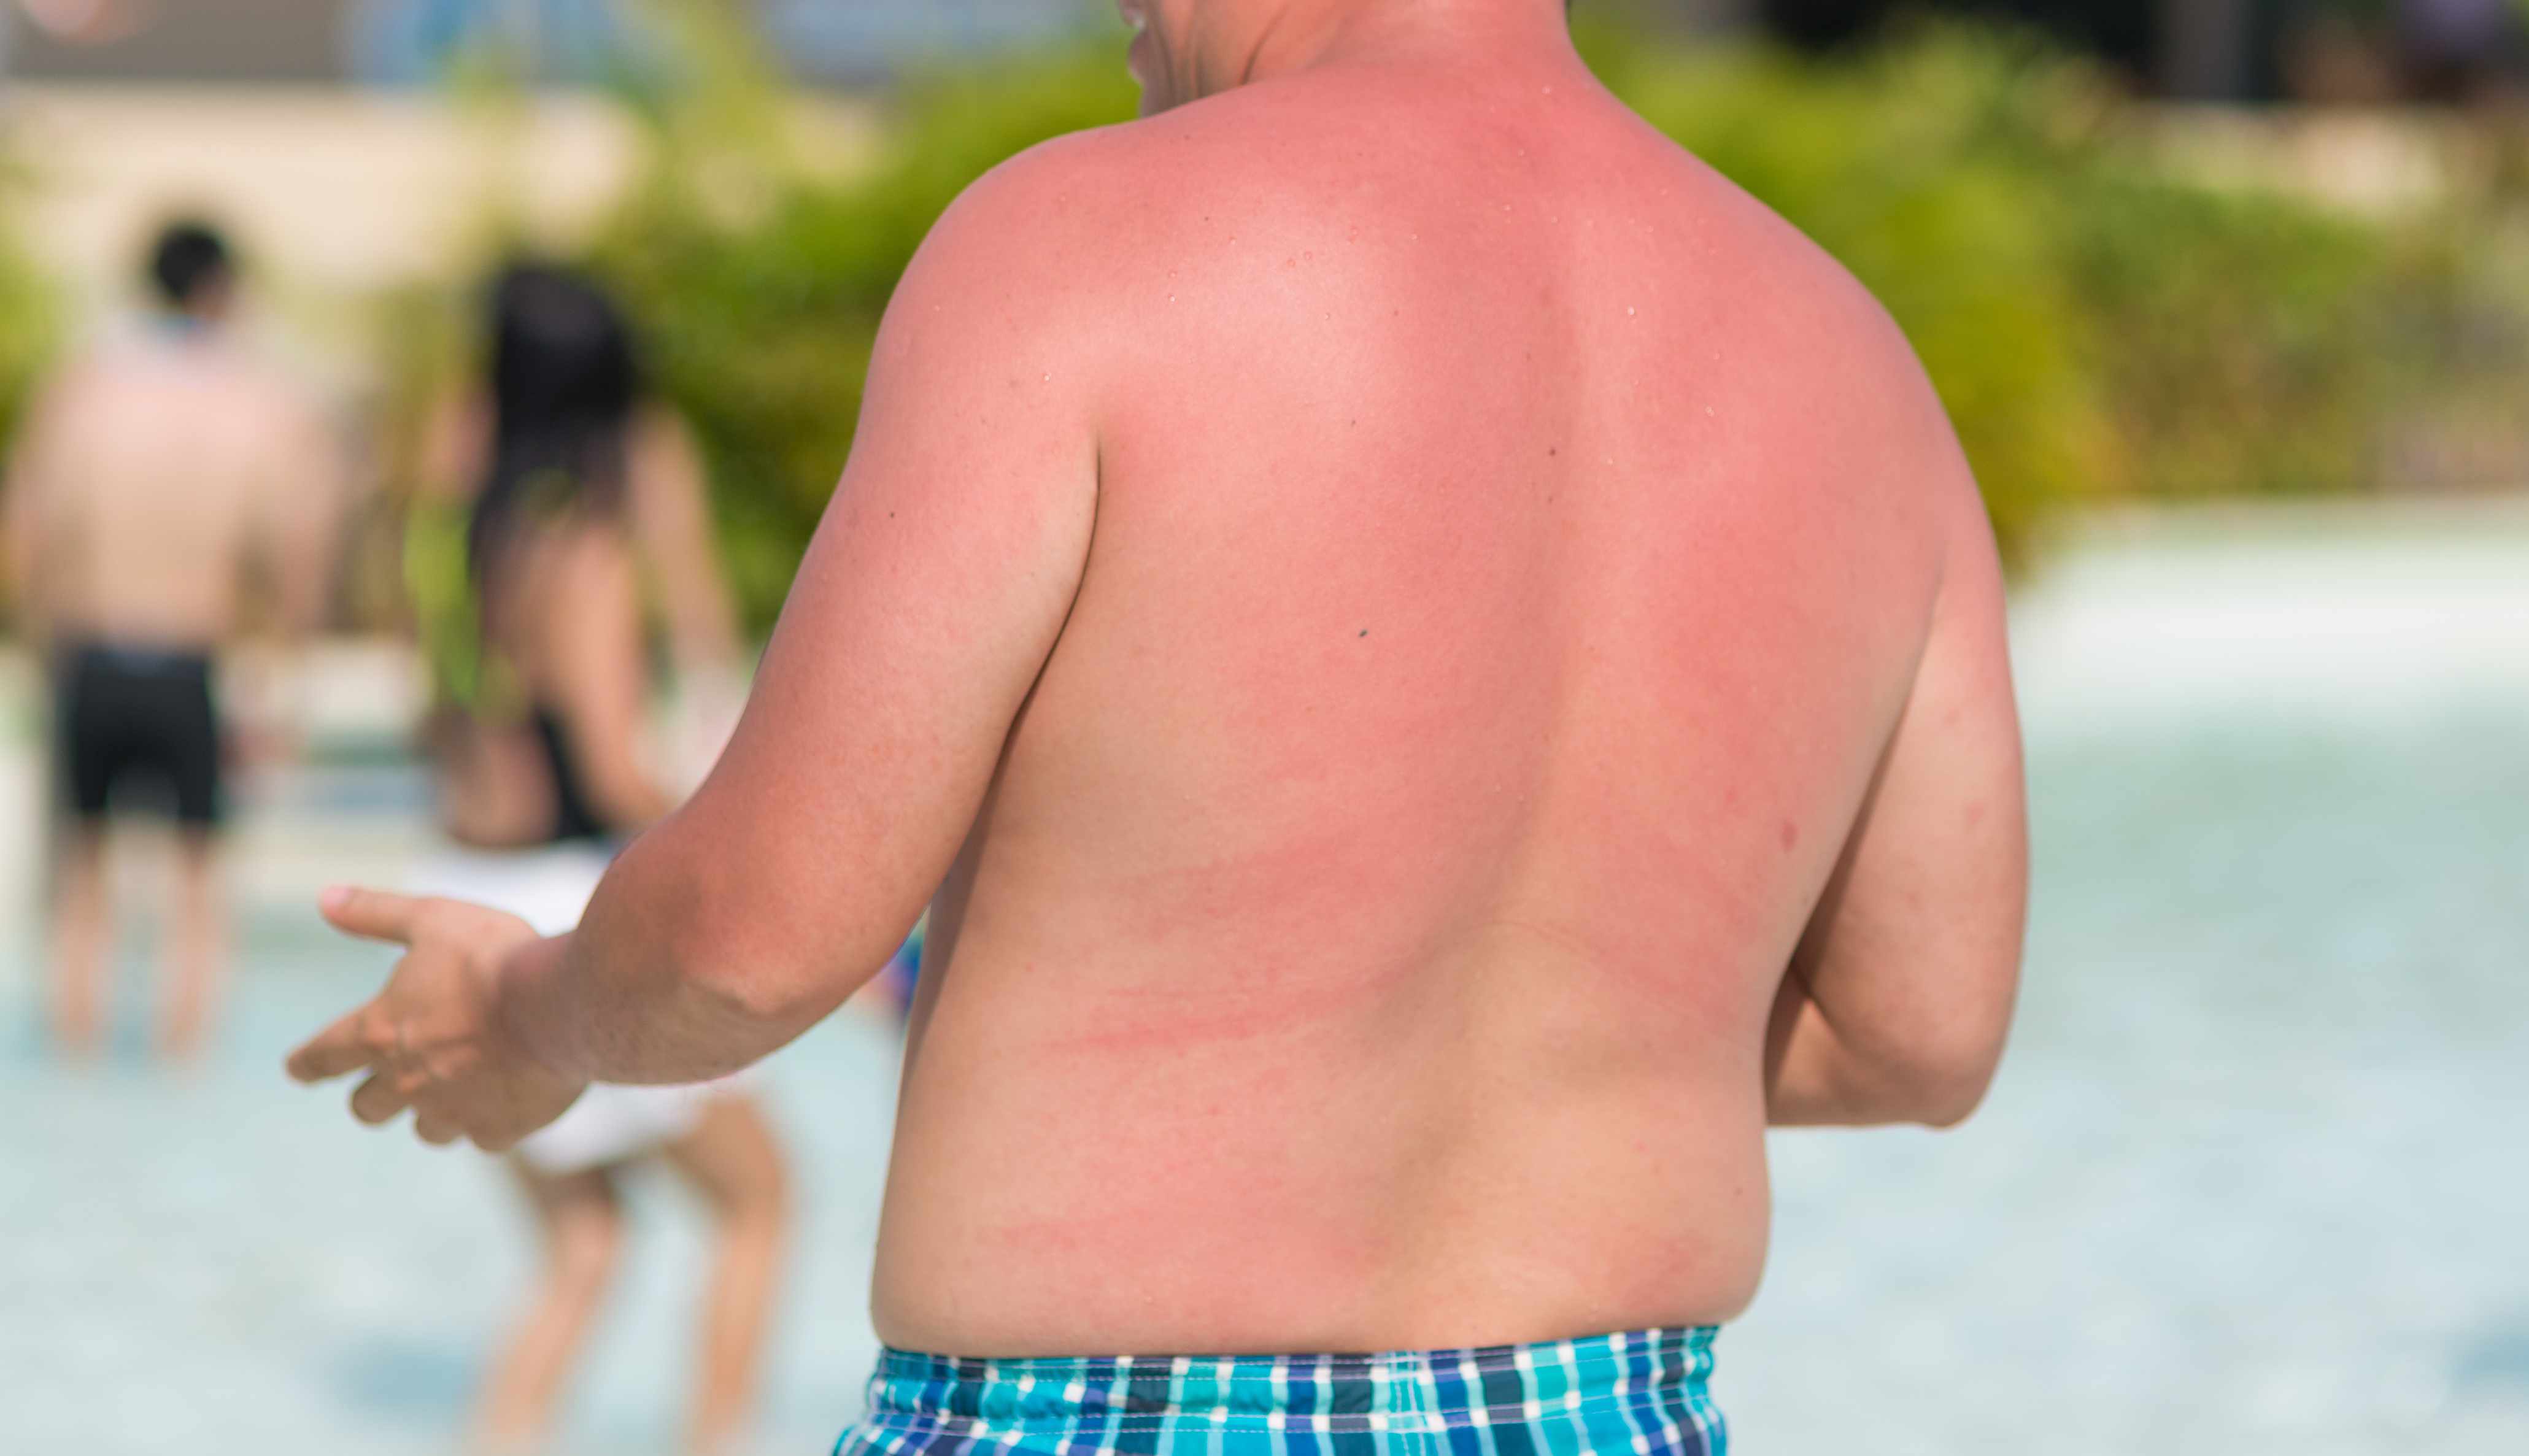 a man on the beach in a bathing suit with a bare sunburned back